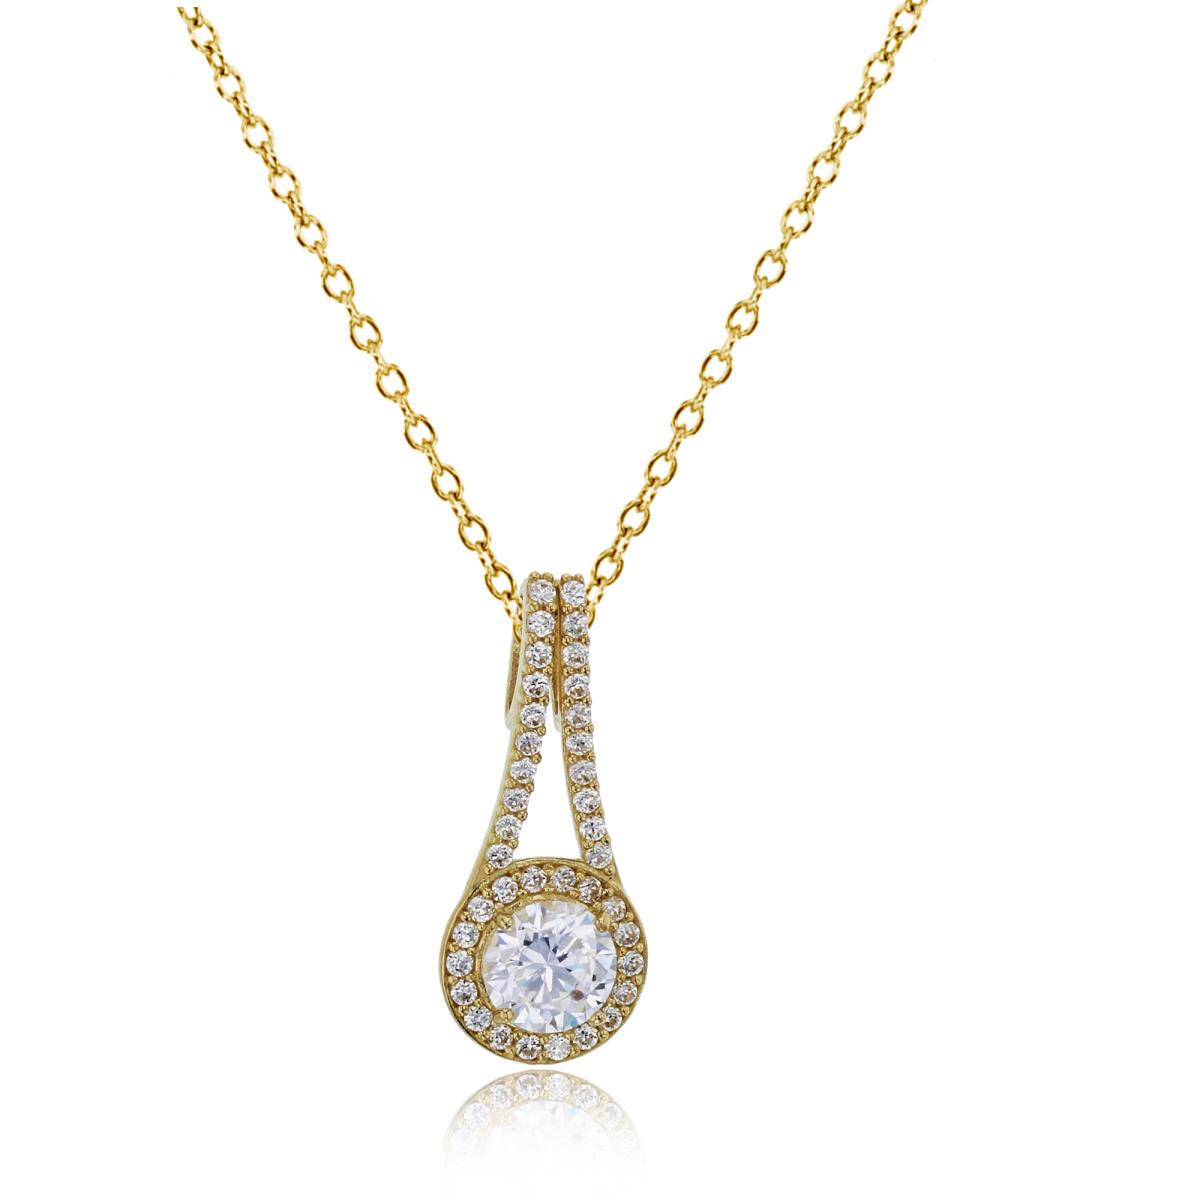 10K Yellow Gold 5mm Rd Cut Halo Elongated Teardrop 18" Necklace